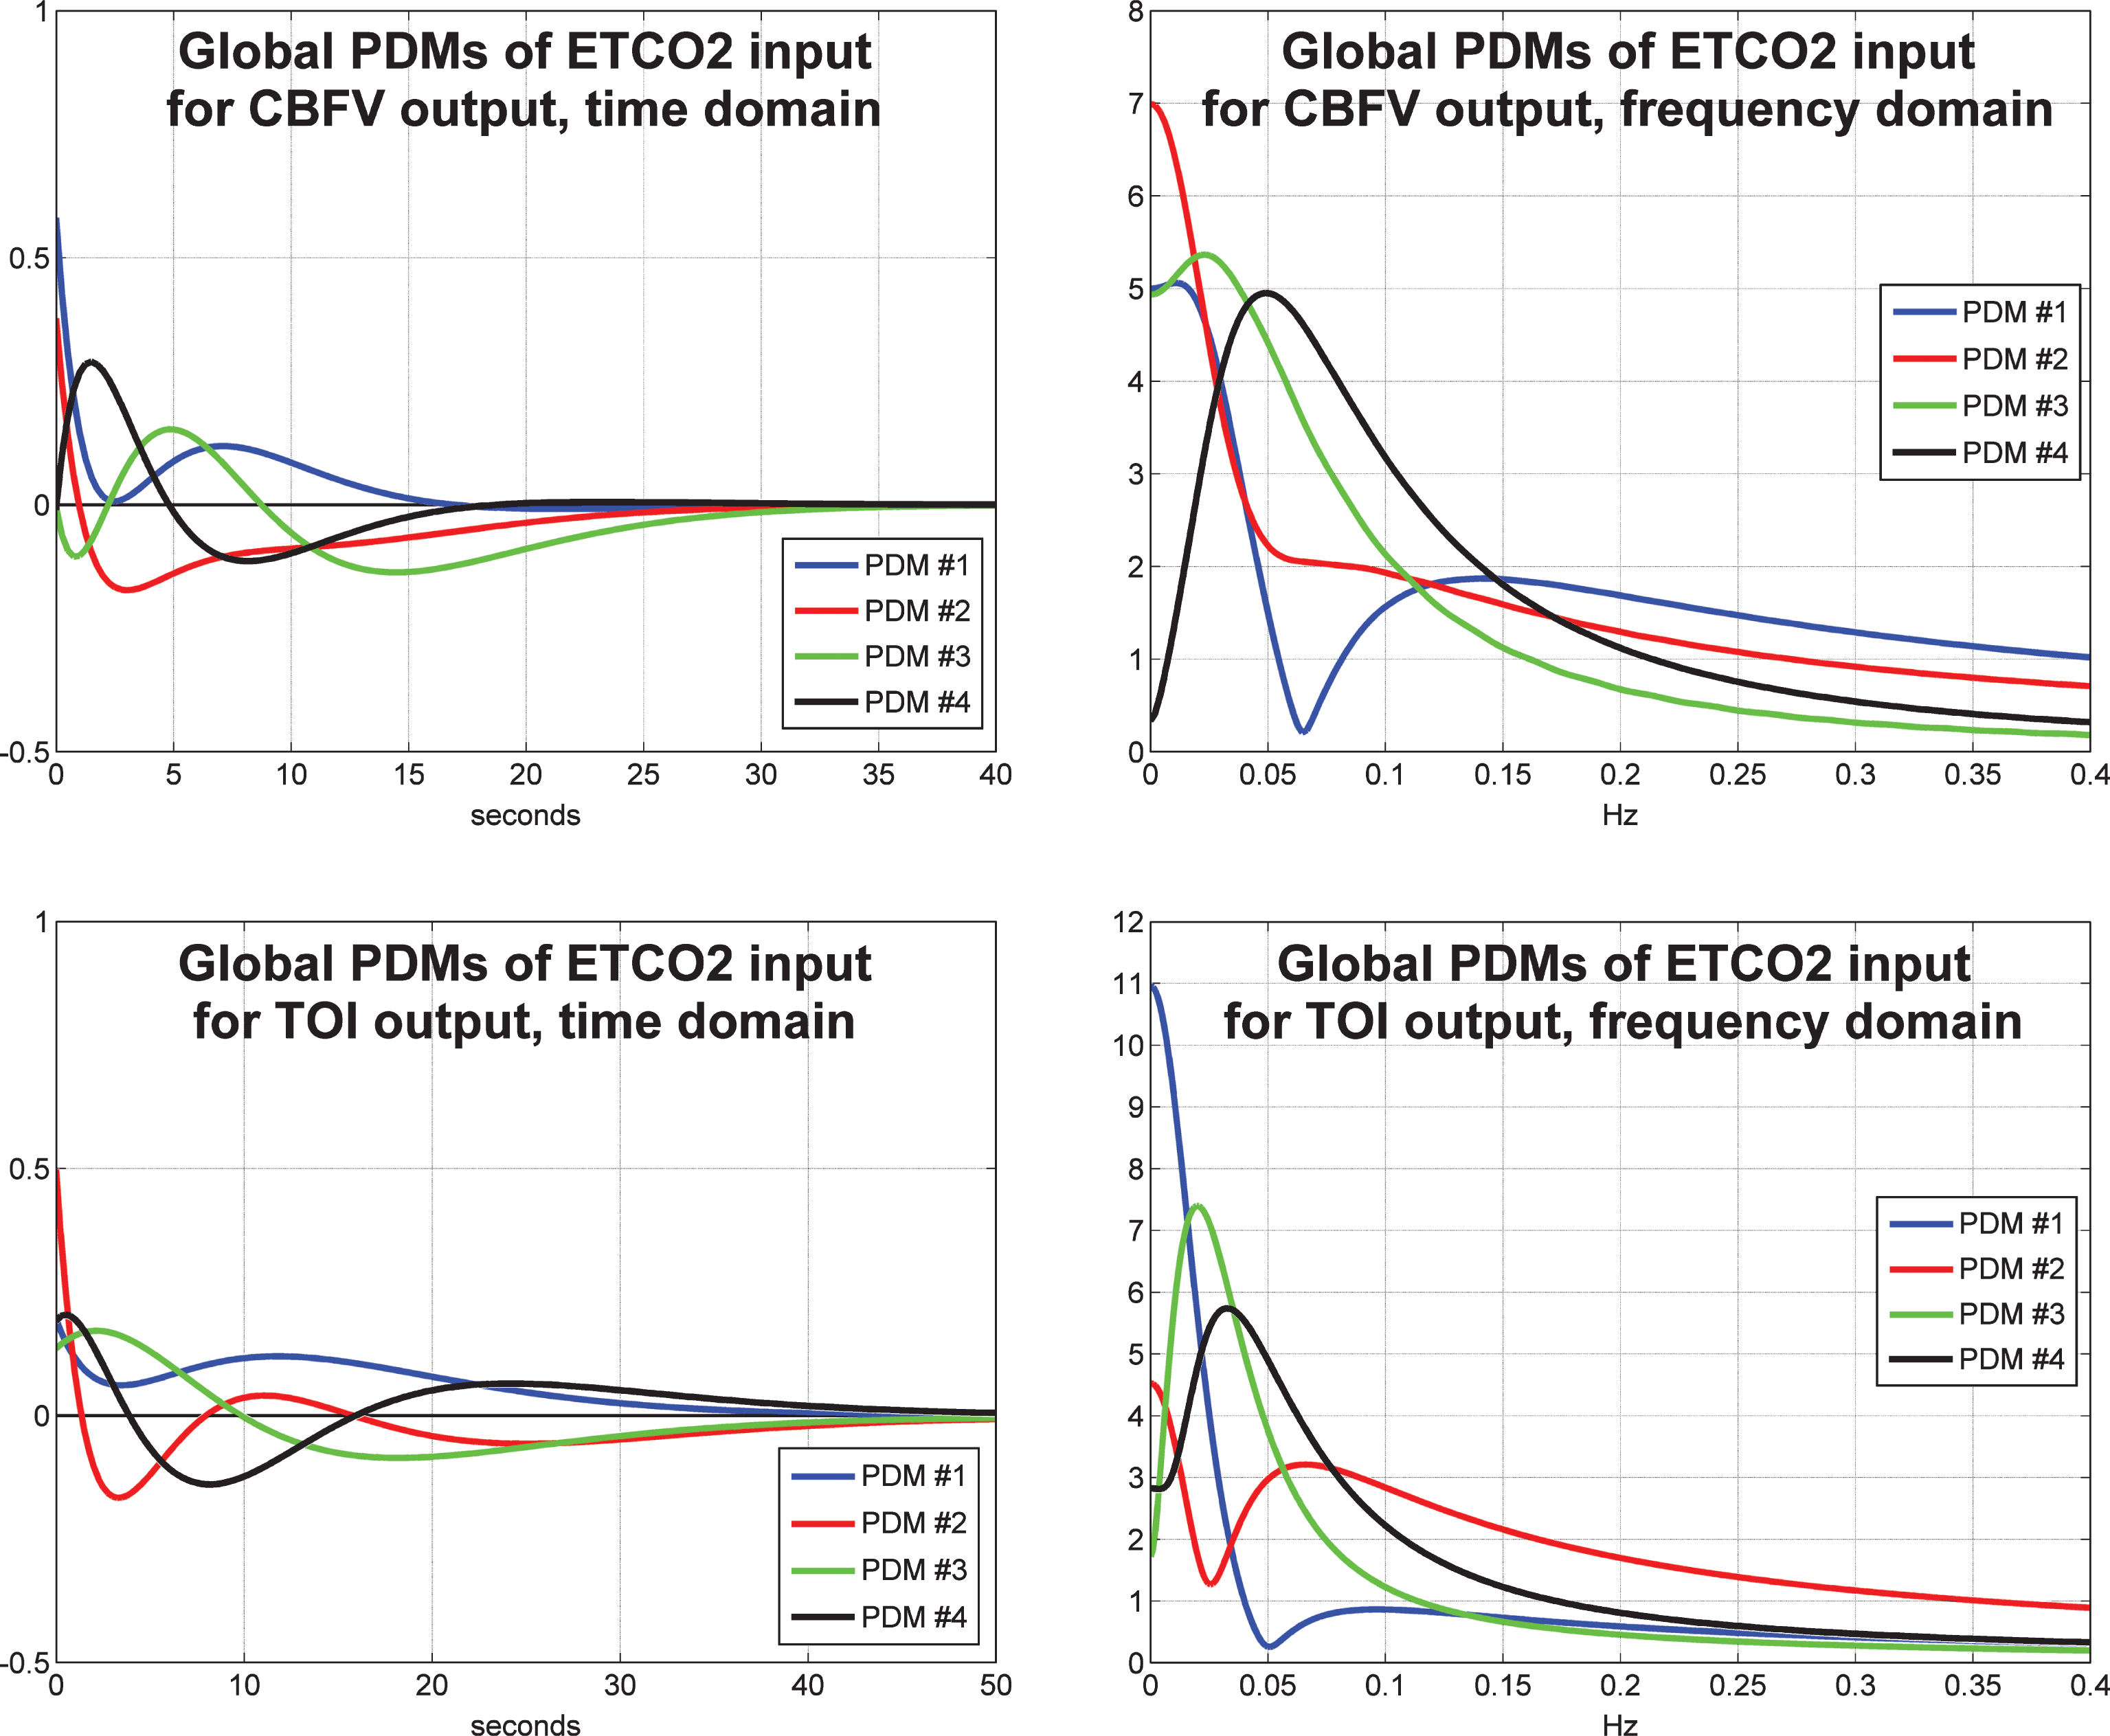 The four global PDMs for the ETCO2 input obtained from the data of 20 control subjects (10 male and 10 female) for the CBFV output measured via TCD (top) and from the data of 22 control subjects (11 male and 11 female) for the TOI output measured via NIRS (bottom) in the time-domain (left) and frequency-domain (right).